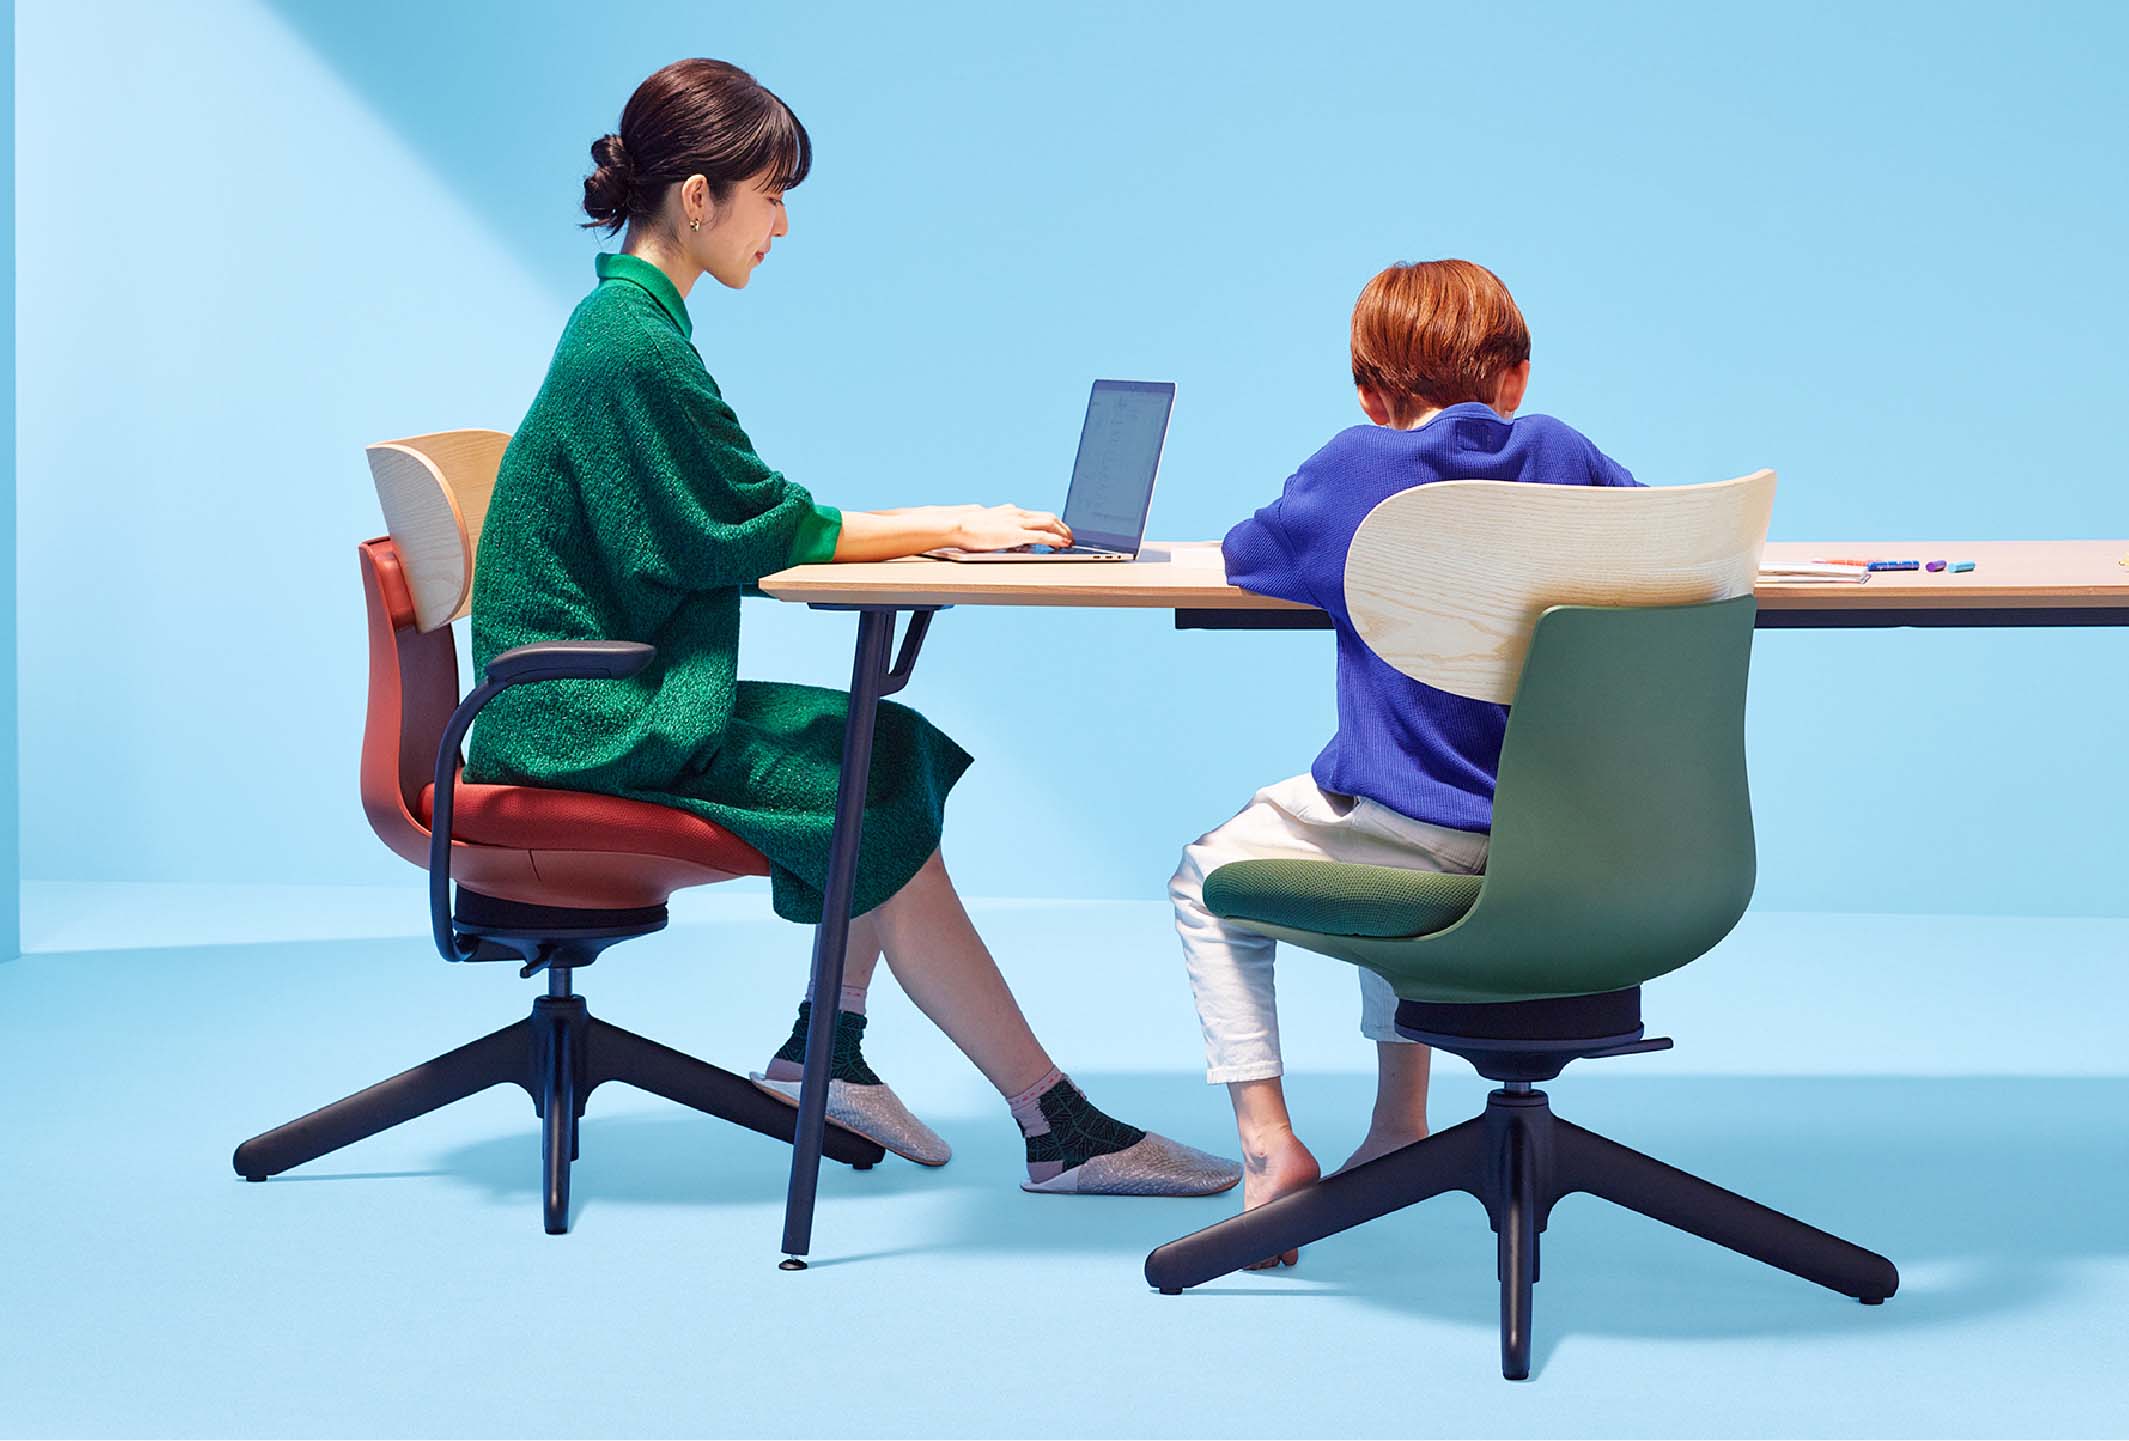 [NEW CHAIR]ingLIFE取り扱い開始のお知らせ｜NEWS｜WORKAHOLIC